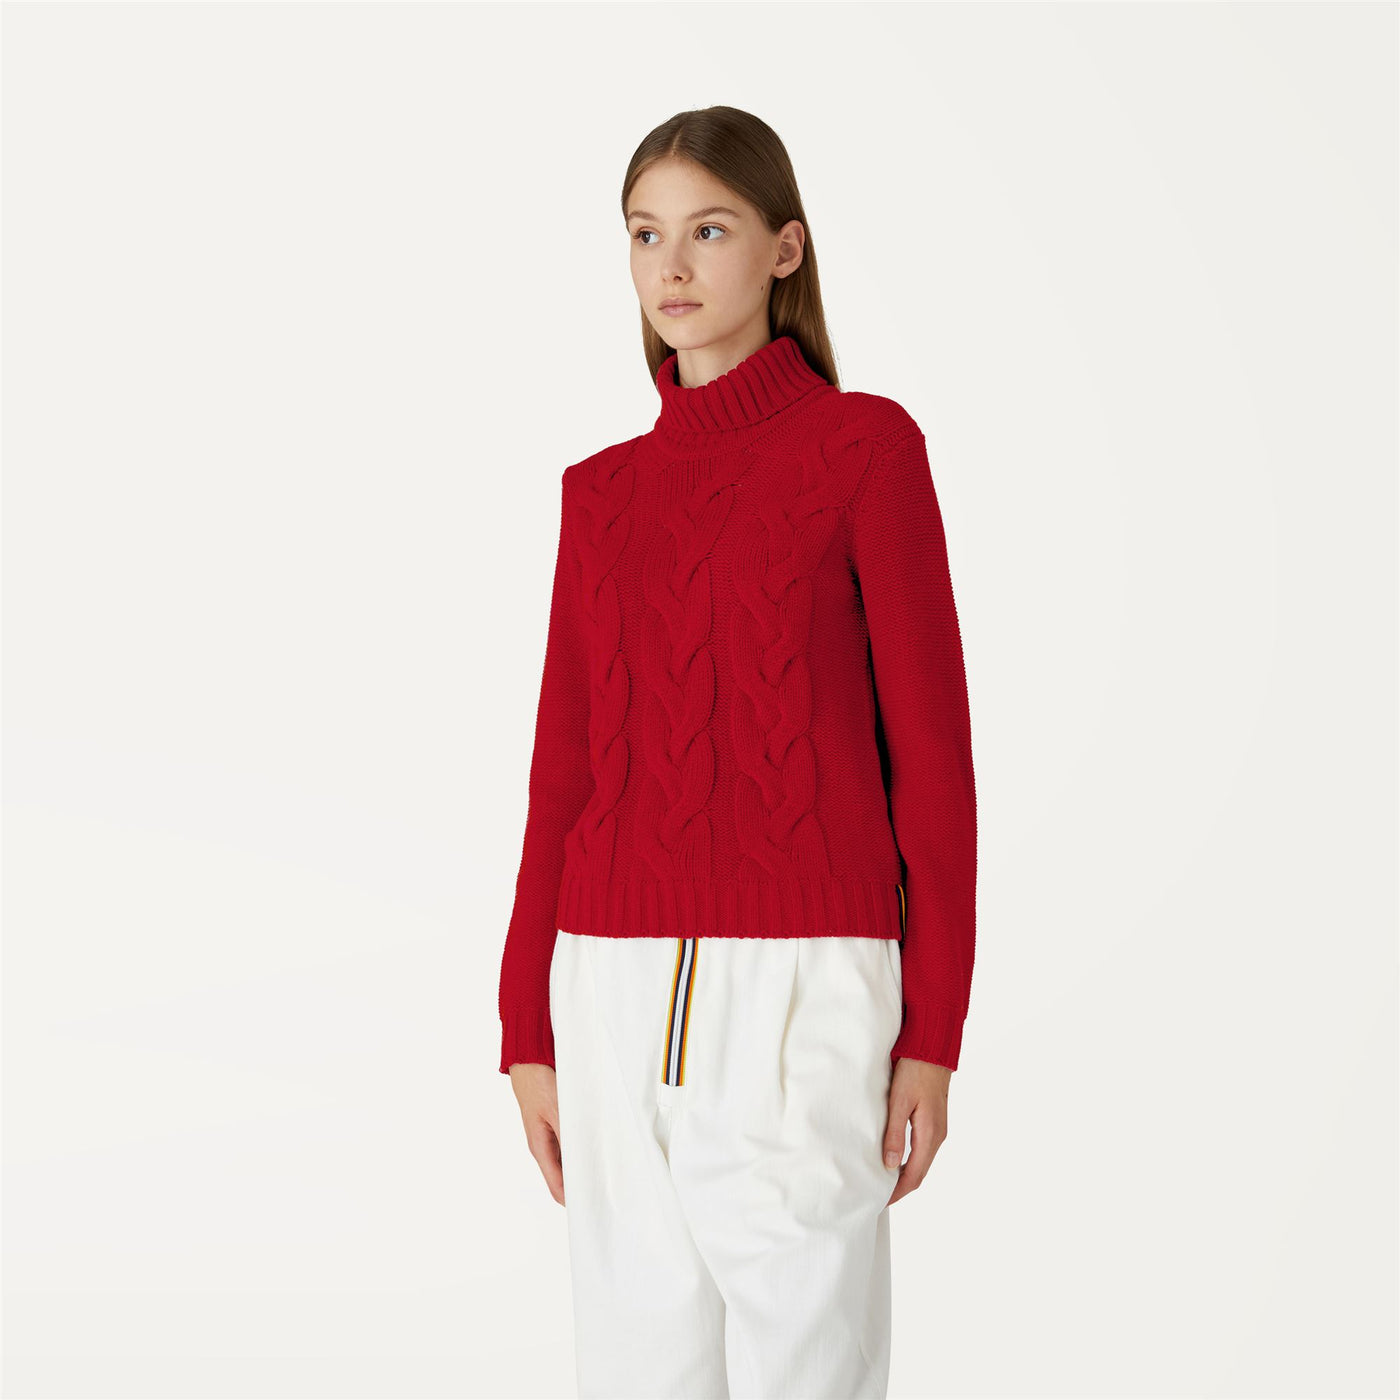 Knitwear Woman CLAIRIE BRAID Pull  Over RED DK Detail Double				